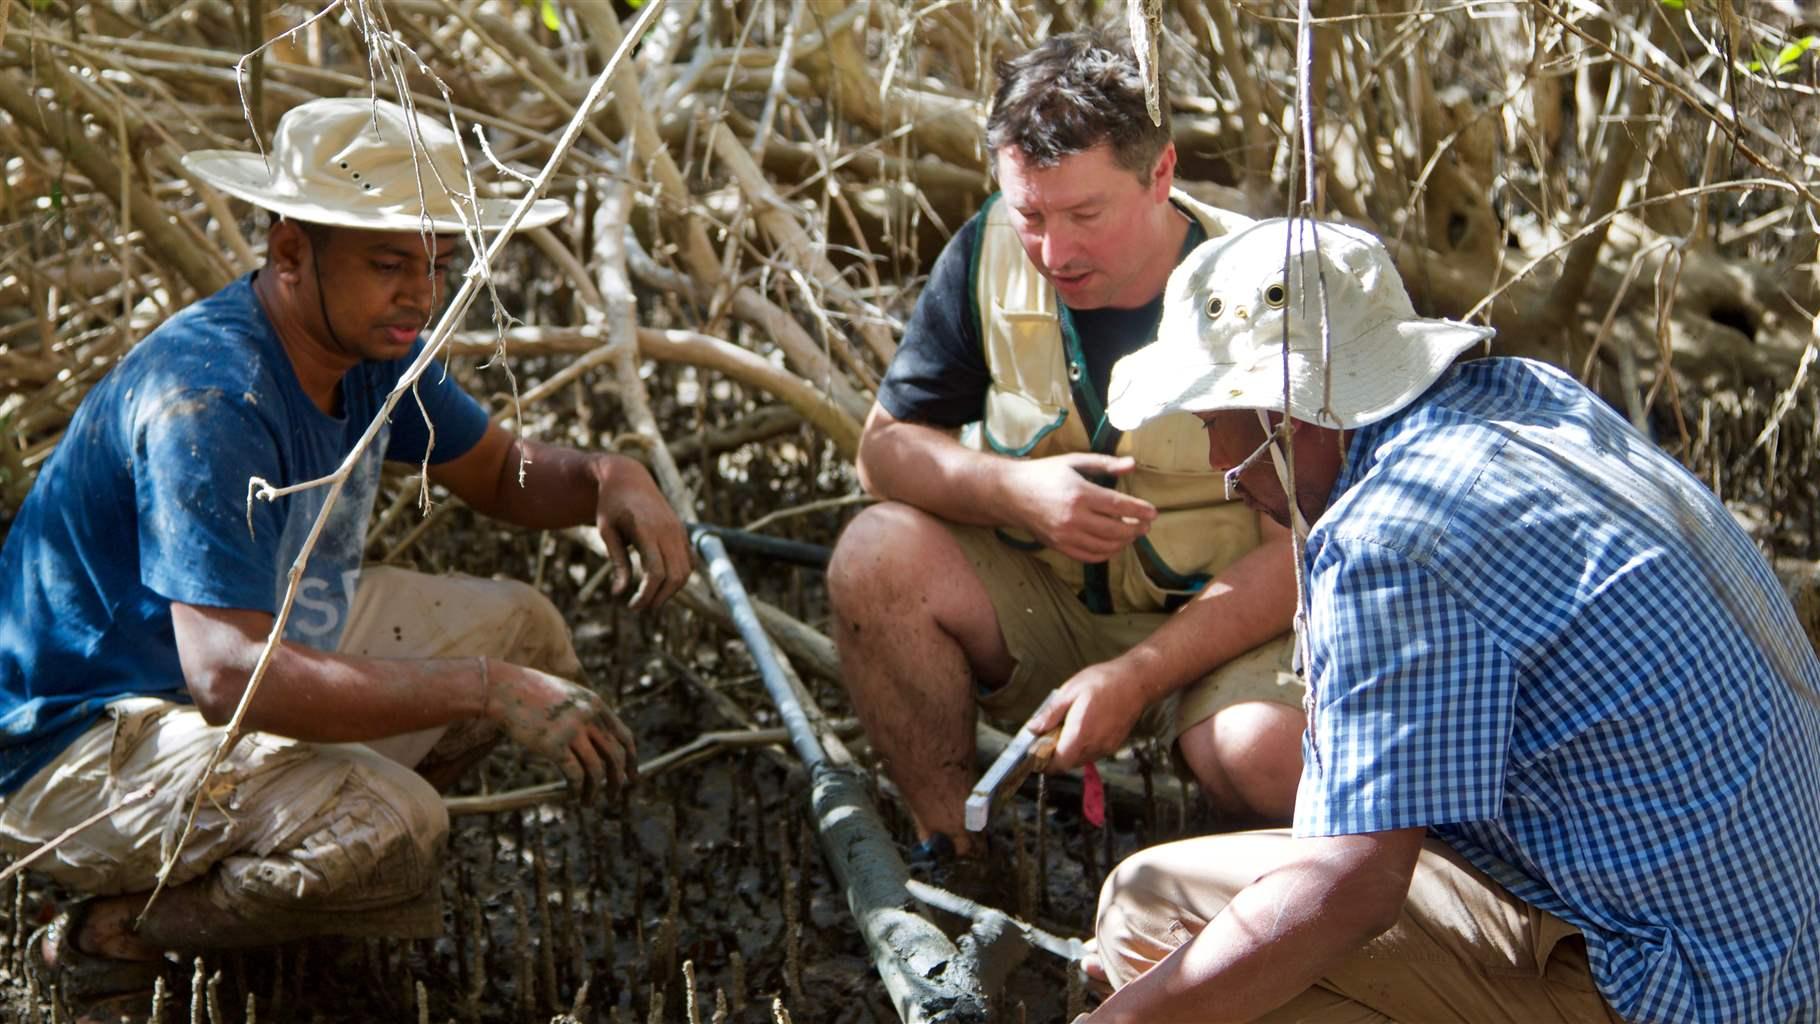 Crooks, center, leads an international team of volunteers and scientists quantifying carbon stocks in mangroves, marshes, and sabkha—flat, salt-encrusted desert—in Abu Dhabi, UAE